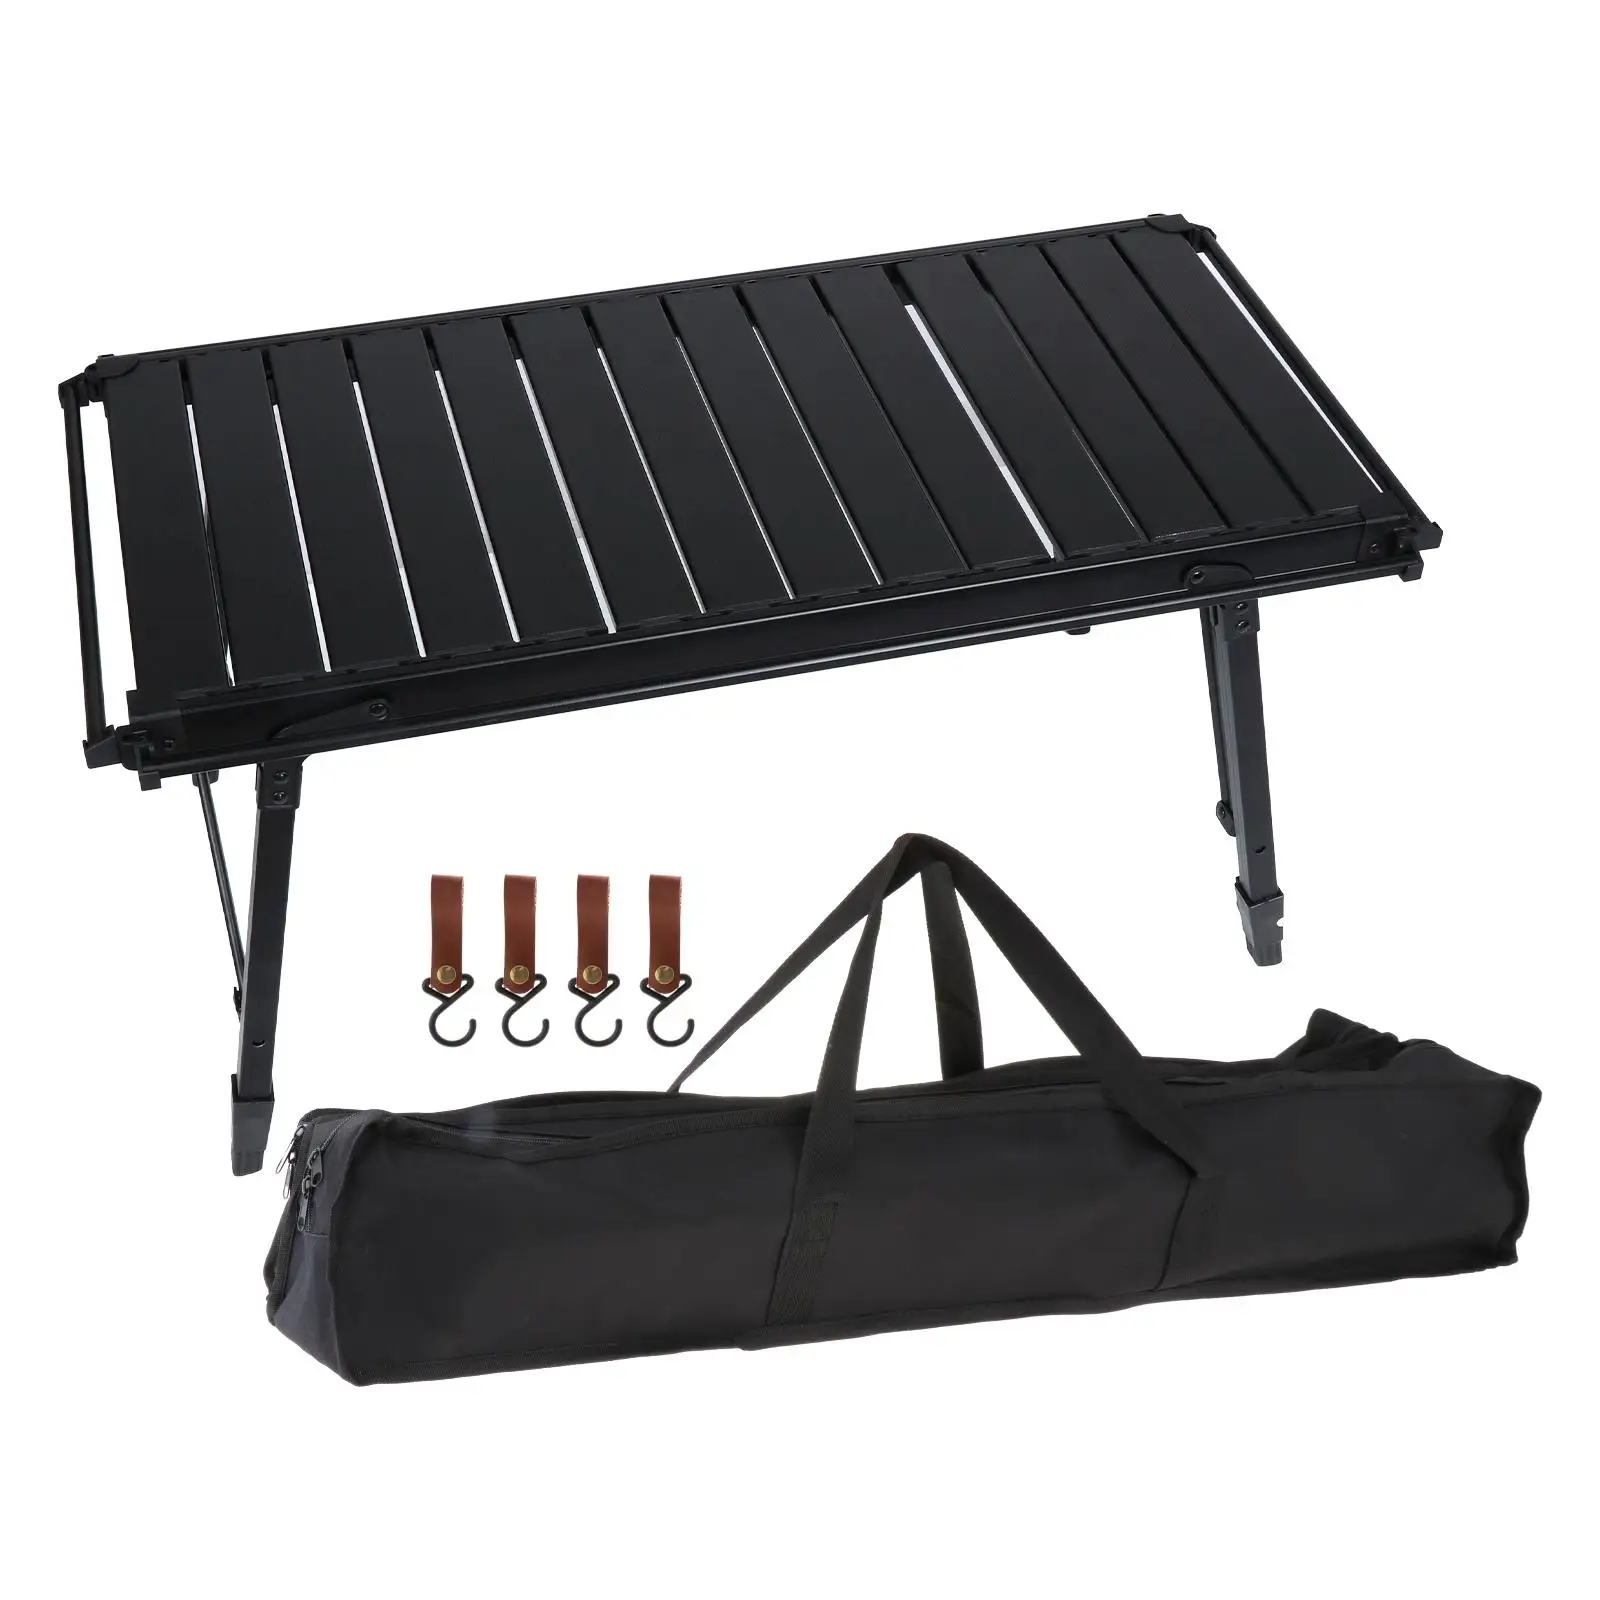 Camping Folding Table Portable Adjustable Height Foldable Picnic Table Outdoor Table for Fishing Deck Cooking Kitchen Hiking